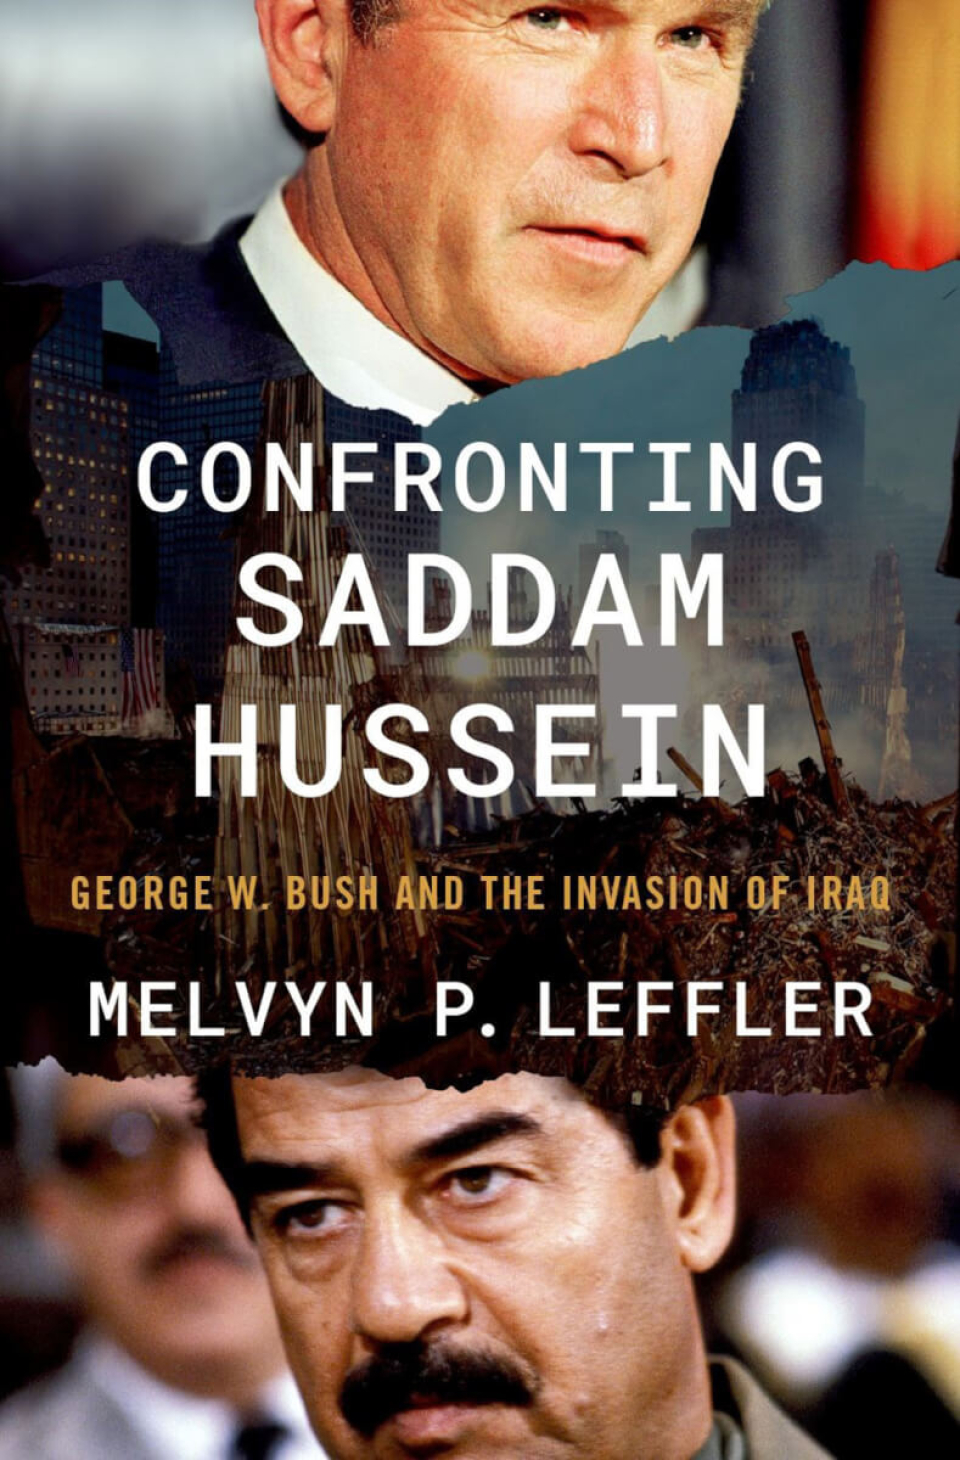 Book of Week: Confronting Saddam Hussein: George W. Bush and the Invasion of Iraq